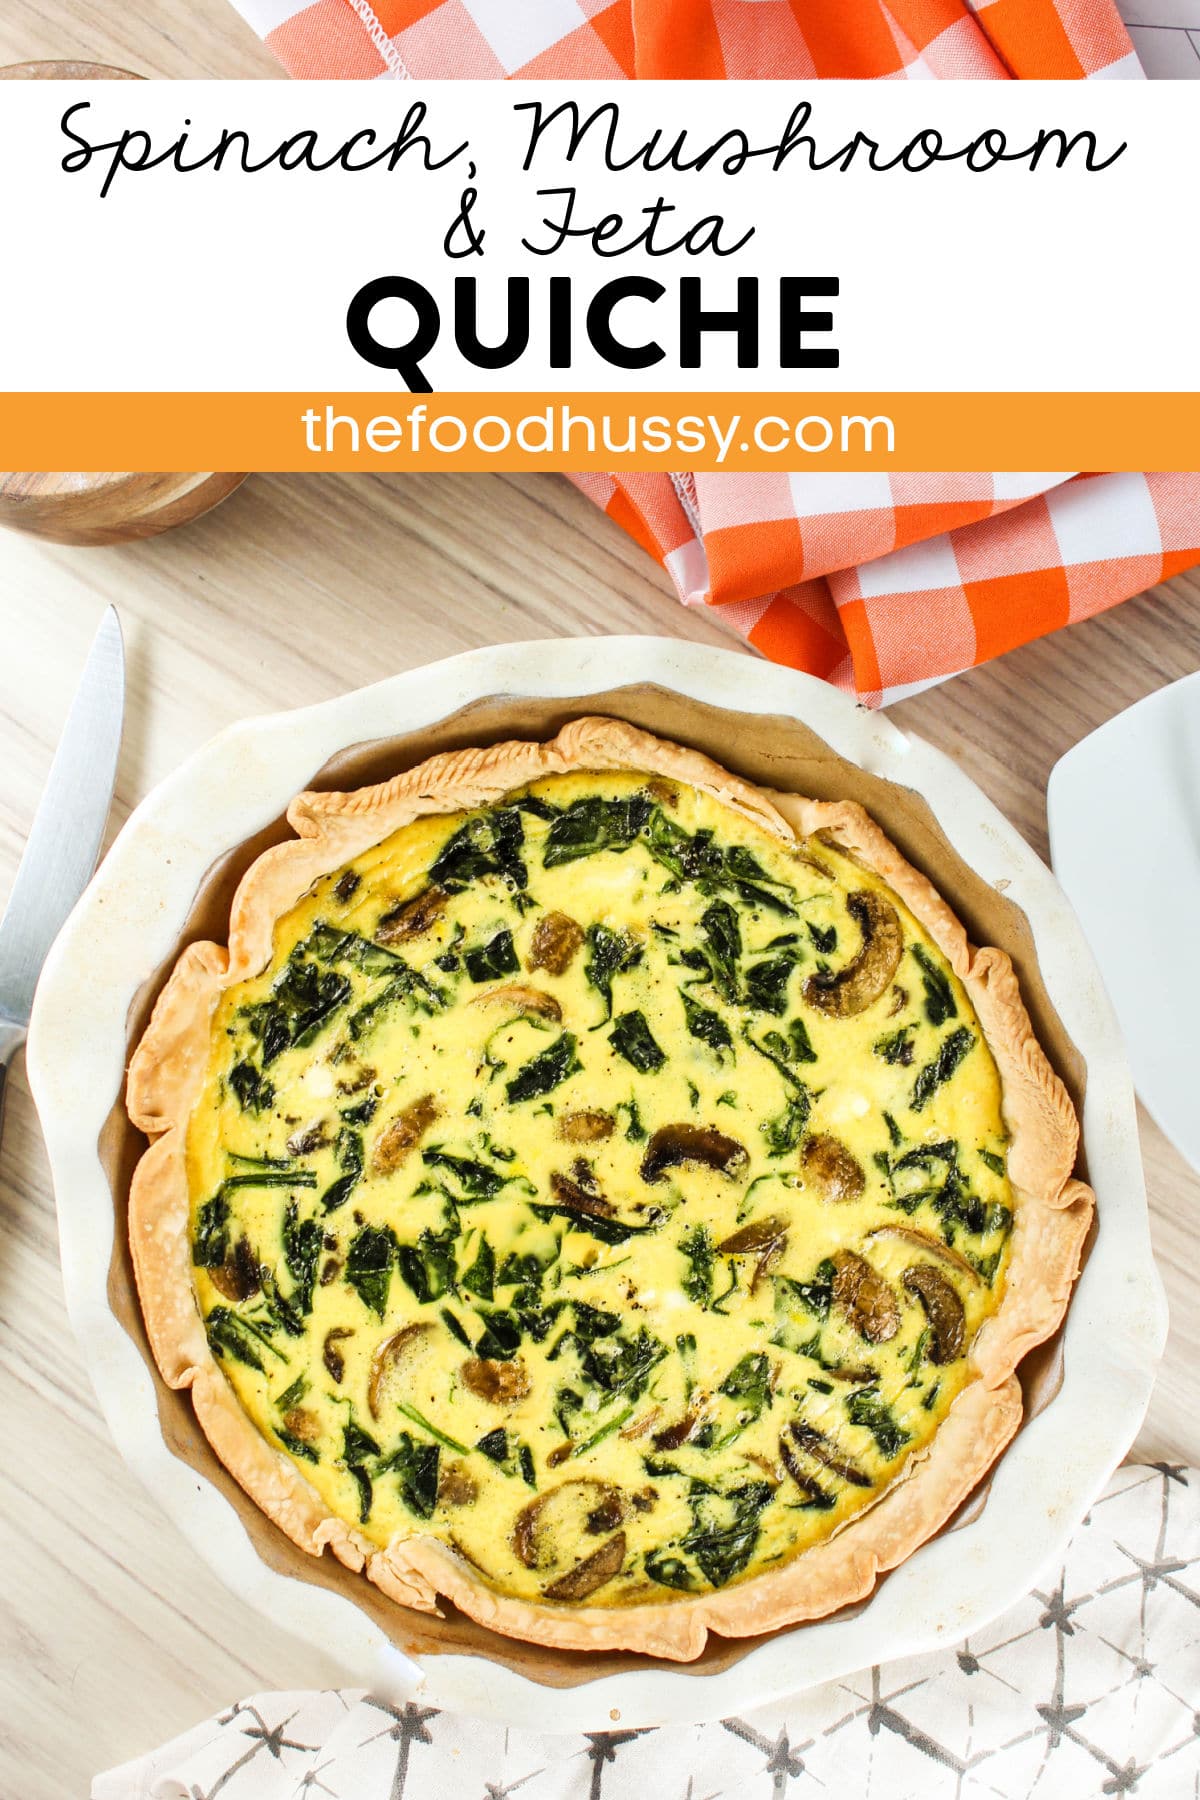 This Spinach Mushroom Feta Quiche is the perfect Sunday brunch dish! You have the freshness from the bright green spinach, buttery goodness from sautéd mushrooms and a little salty from the crumbled feta.
 via @foodhussy